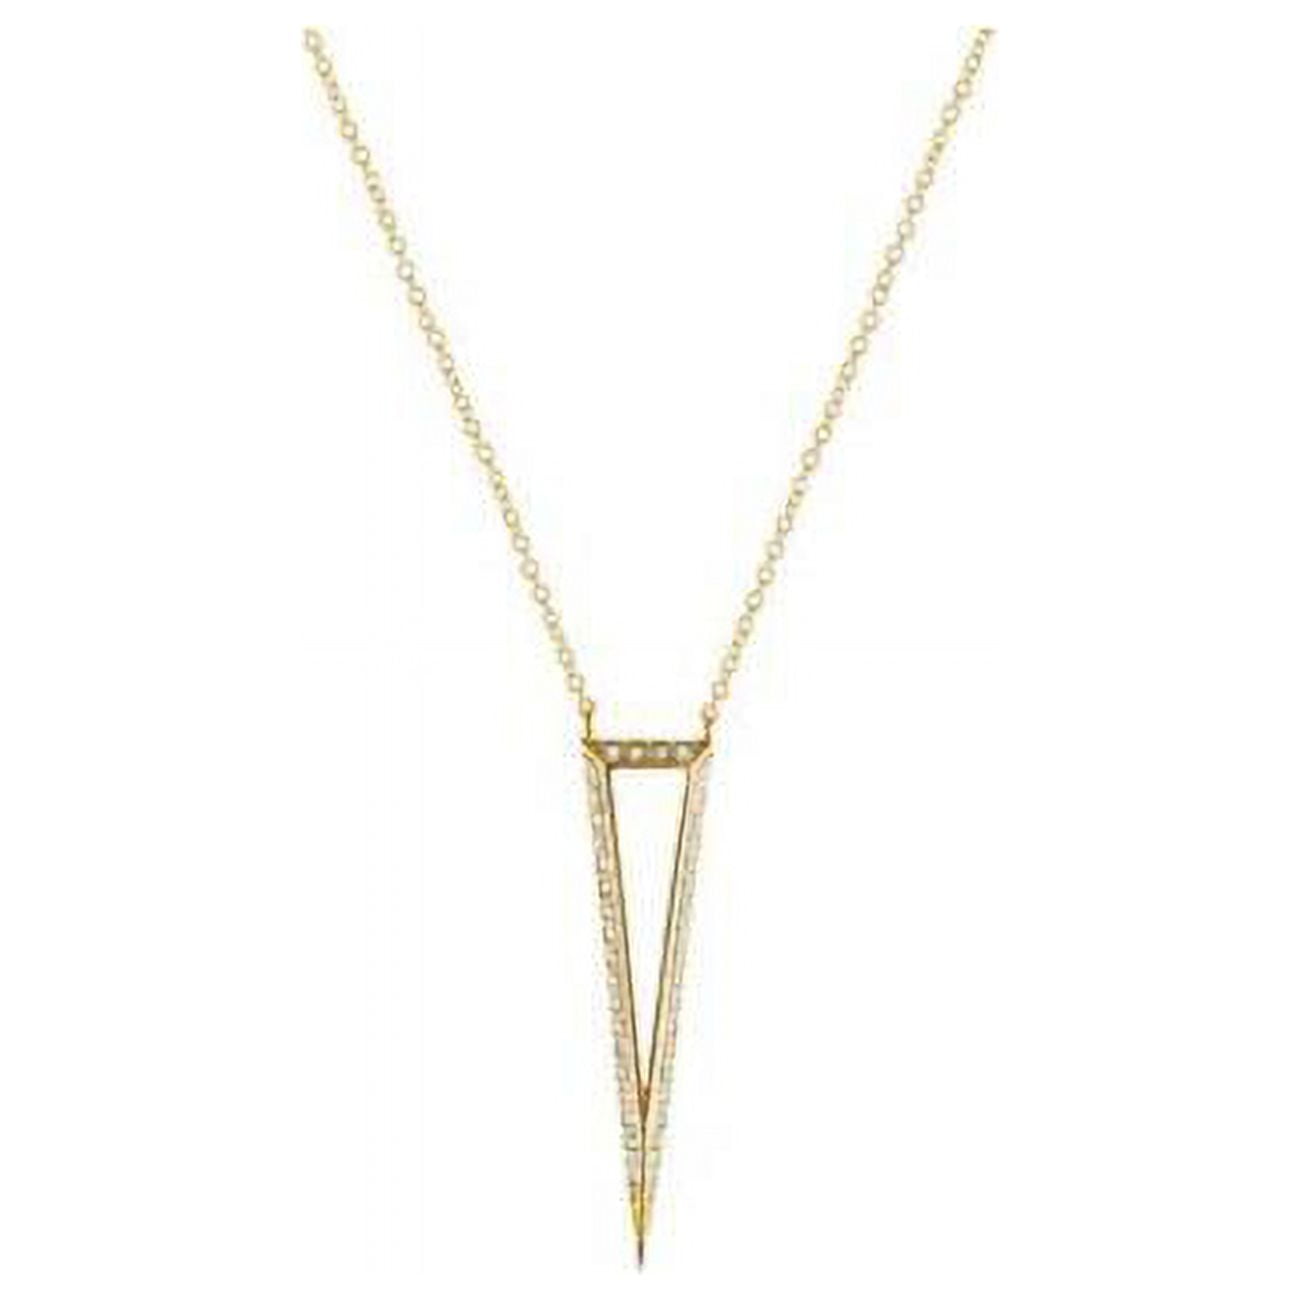 Je1118g 20 In. Plus 2 In. Silver Gold Plated 3d Open Triangle 40 Mm Pave Cubic Zirconia Edges Necklace